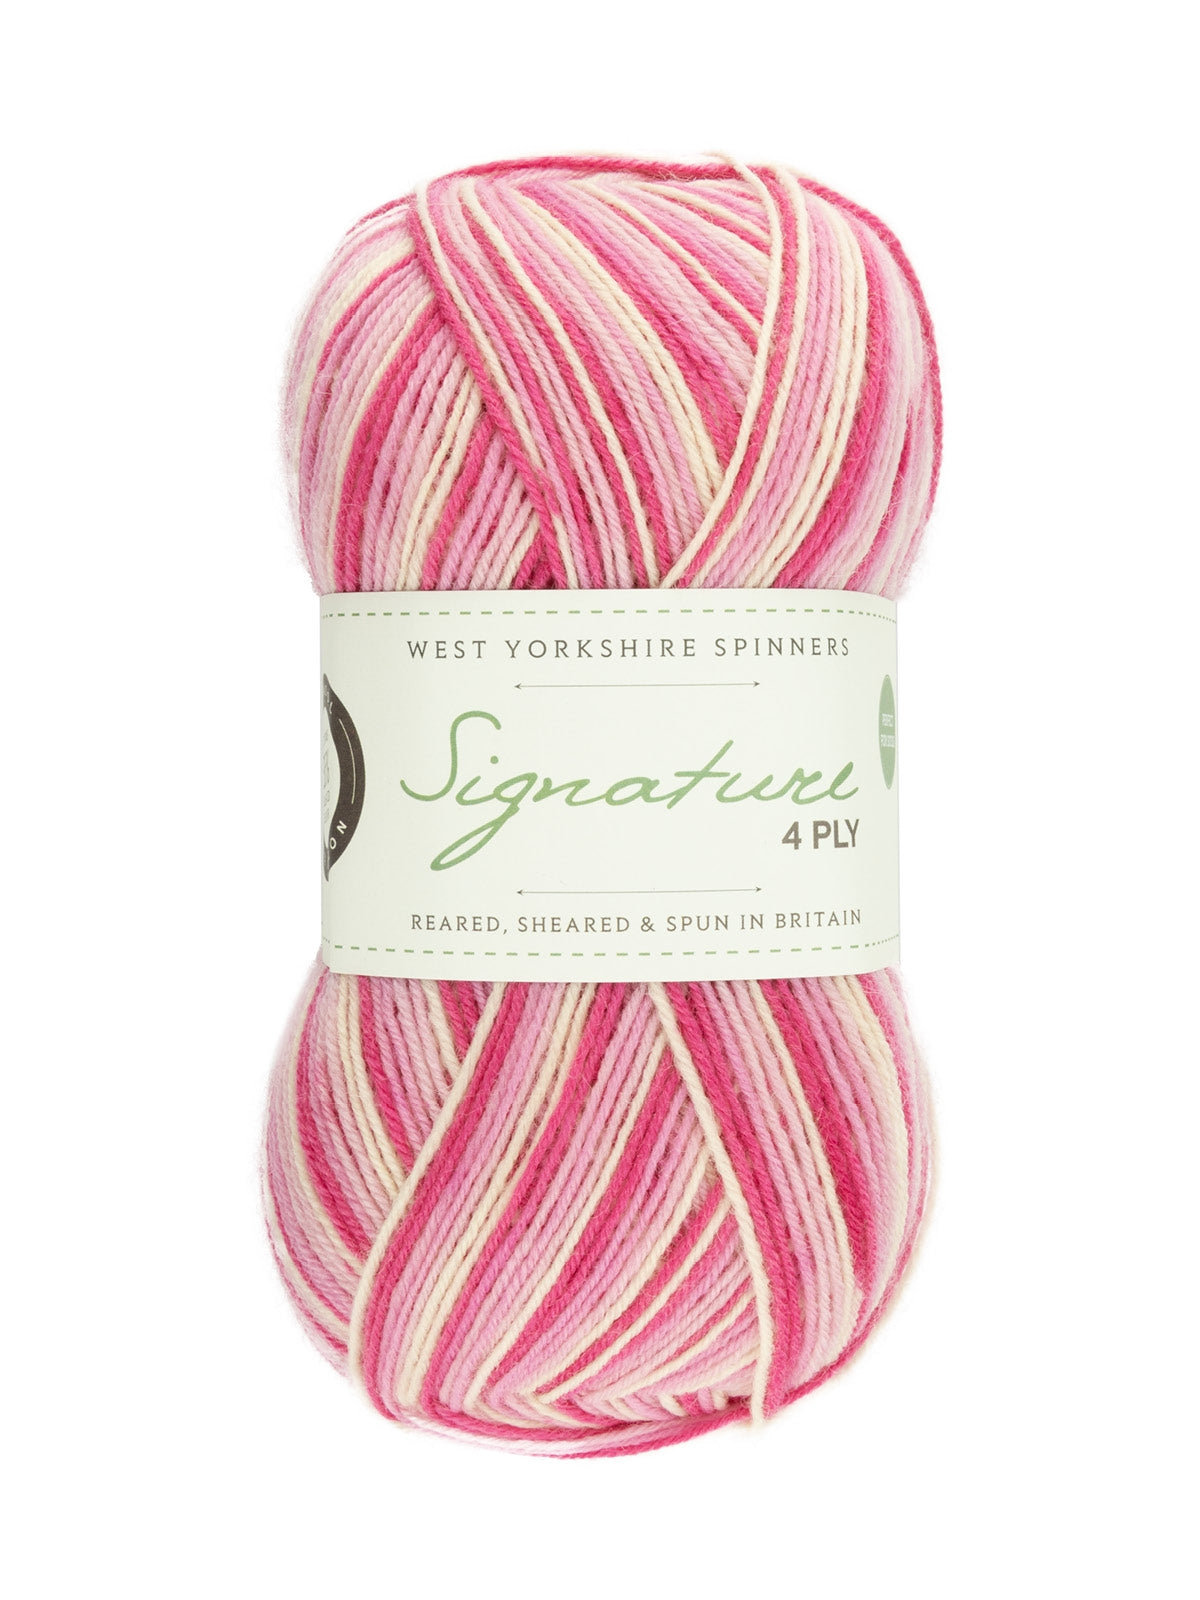 West Yorkshire Spinners Signature 4-Ply - Pink Flamingo